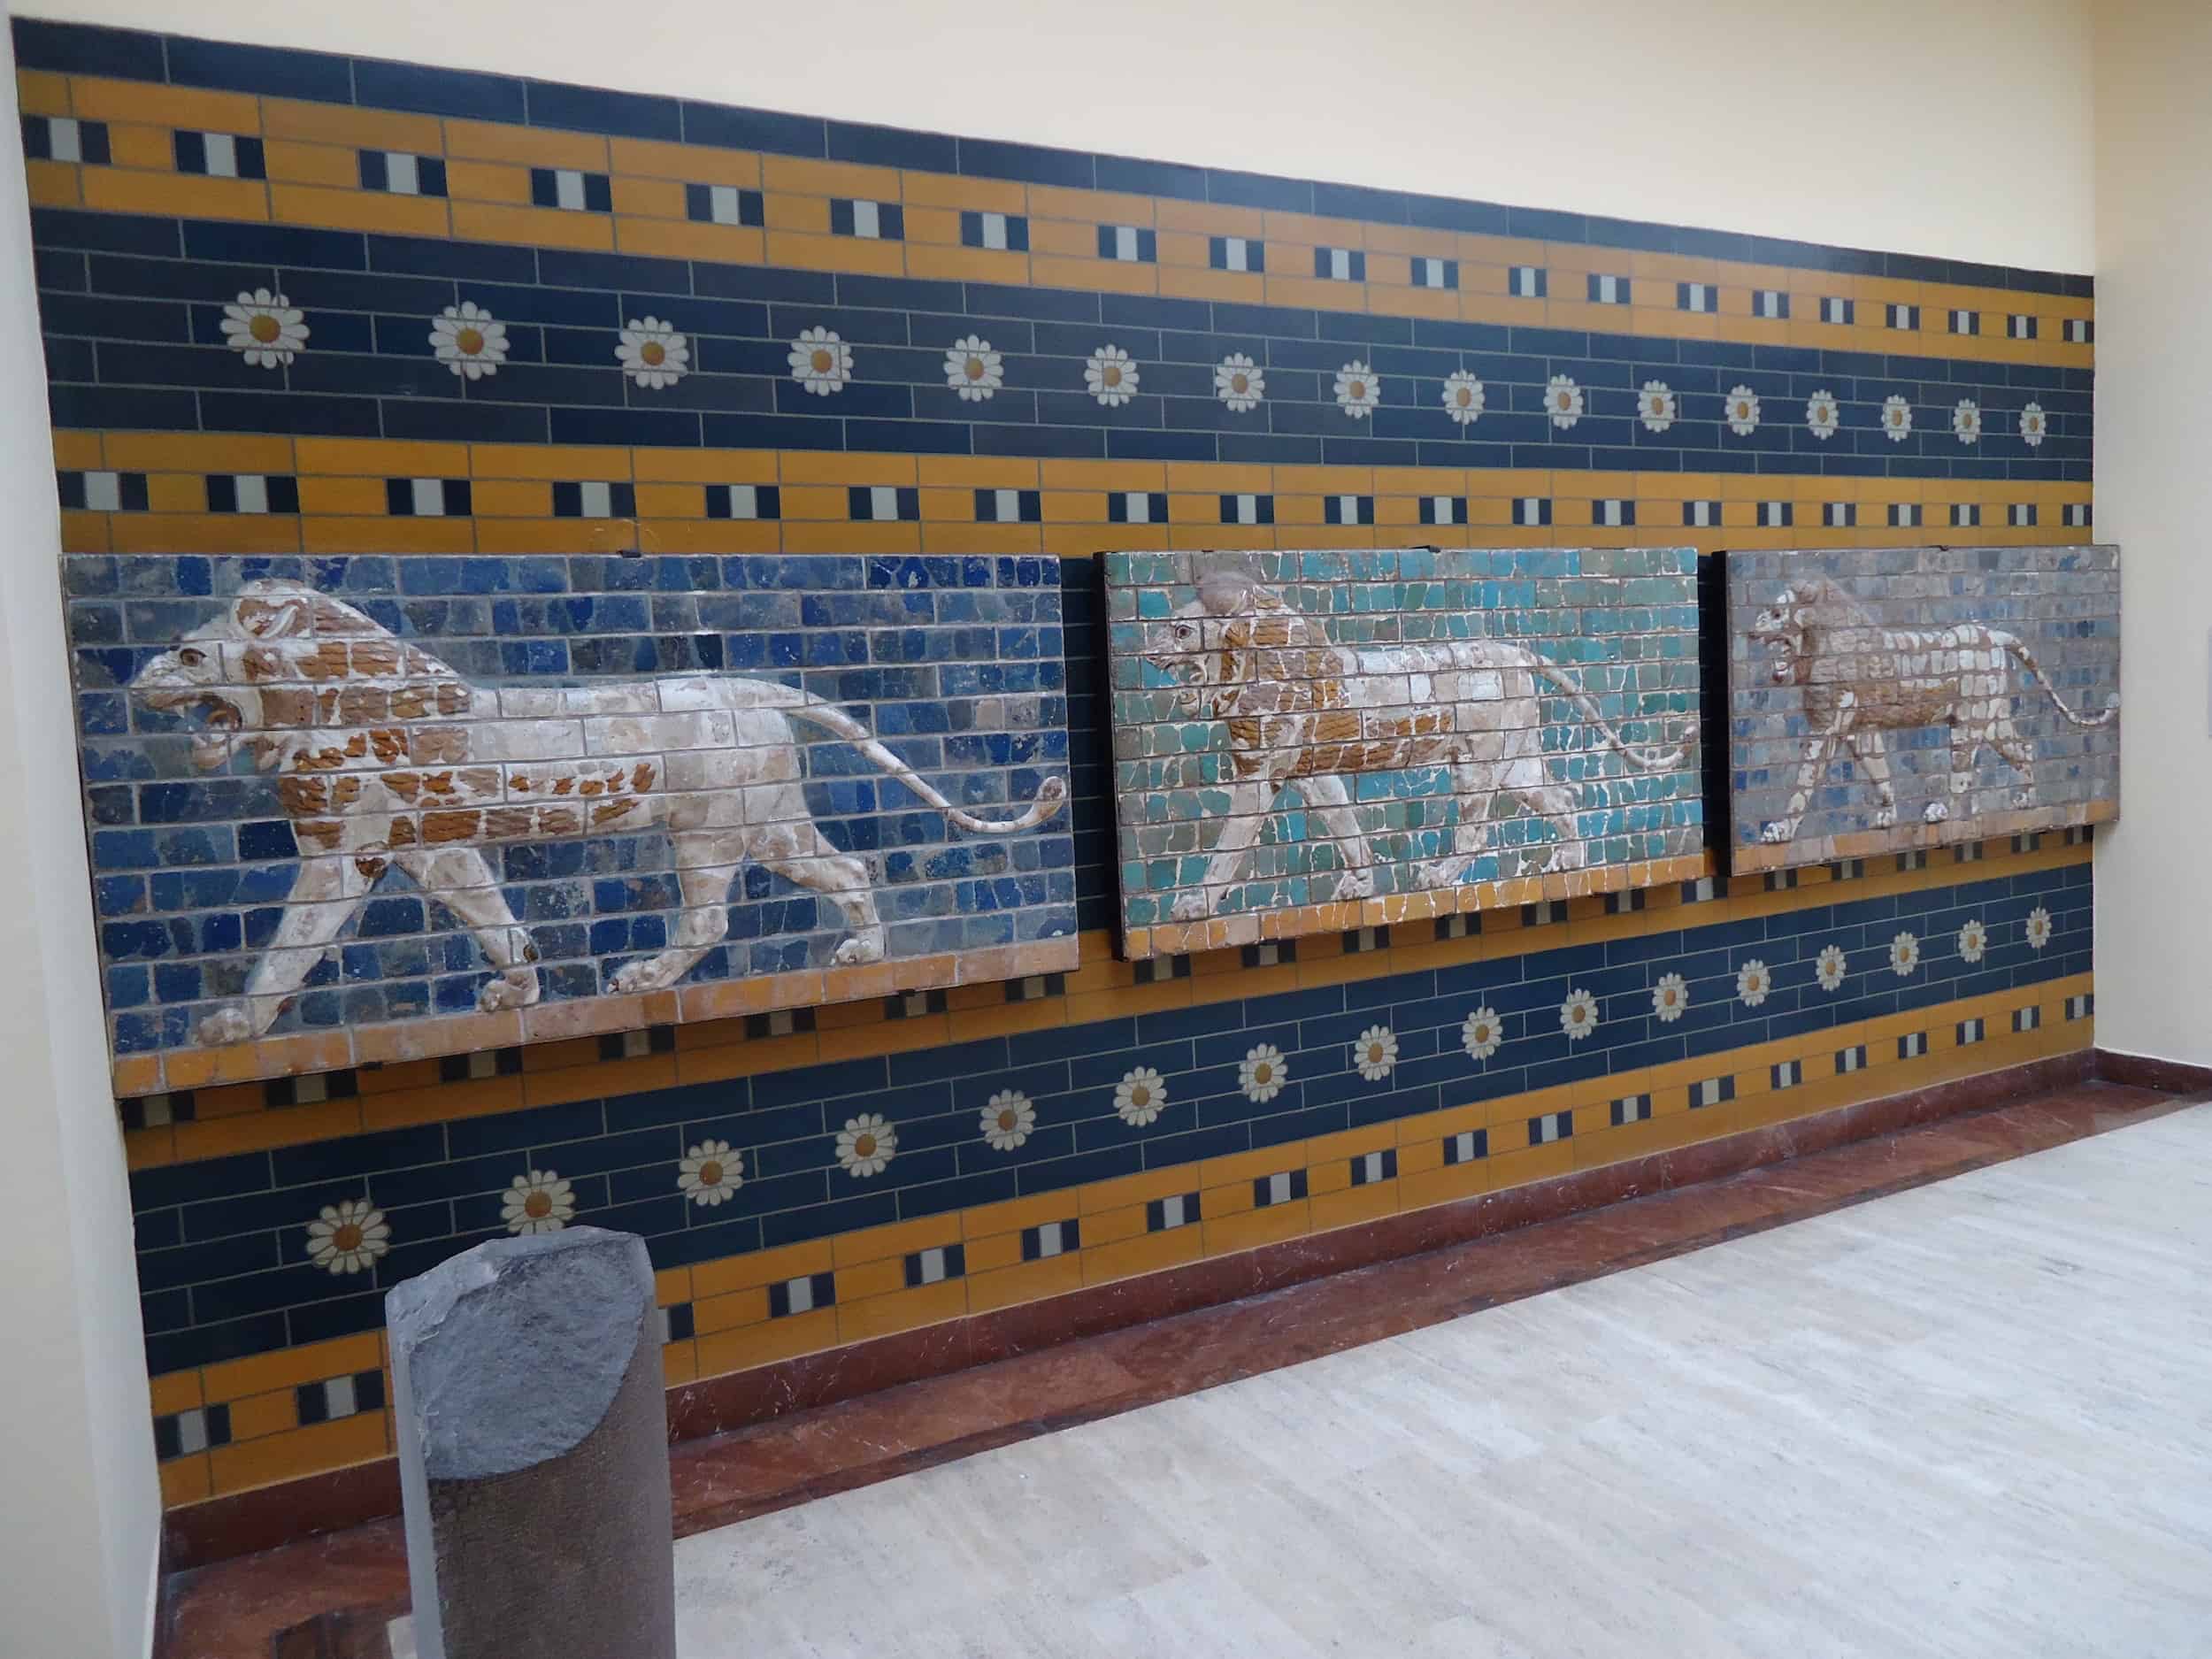 Glazed brick panel from the Processional Way to the Ishtar Gate in Babylon